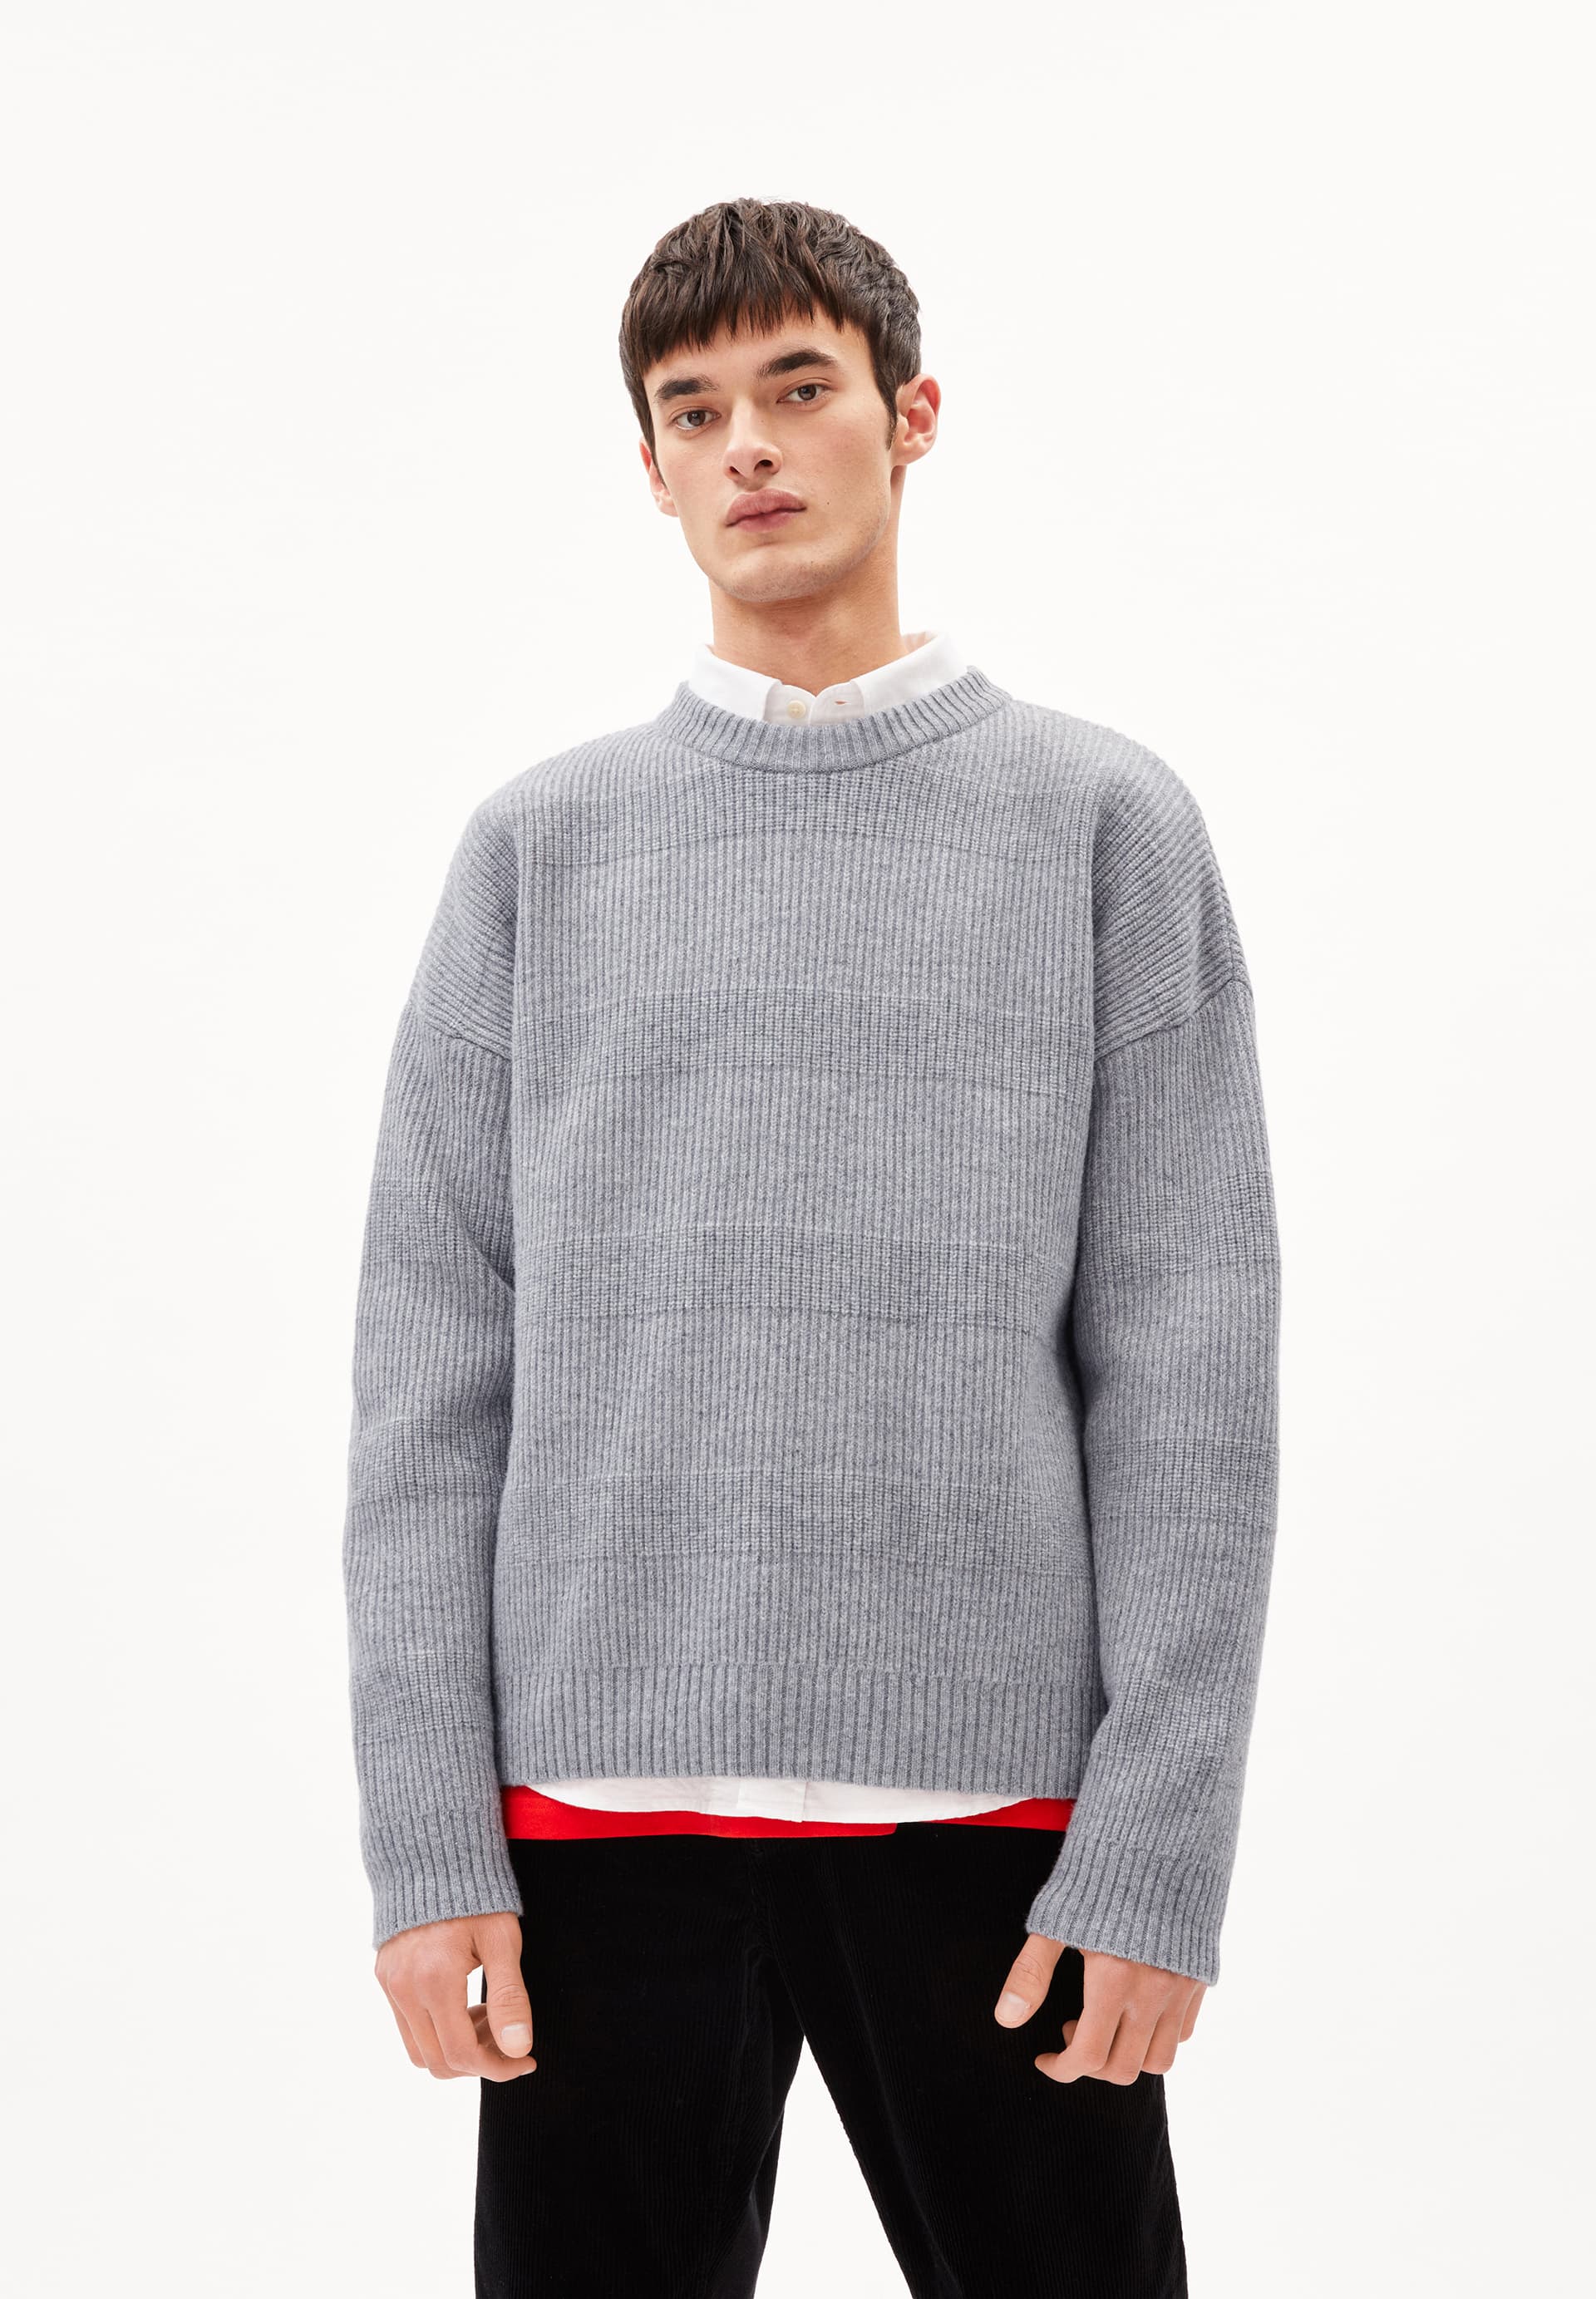 VISKAANO Pullover Relaxed Fit aus Bio-Woll Mix